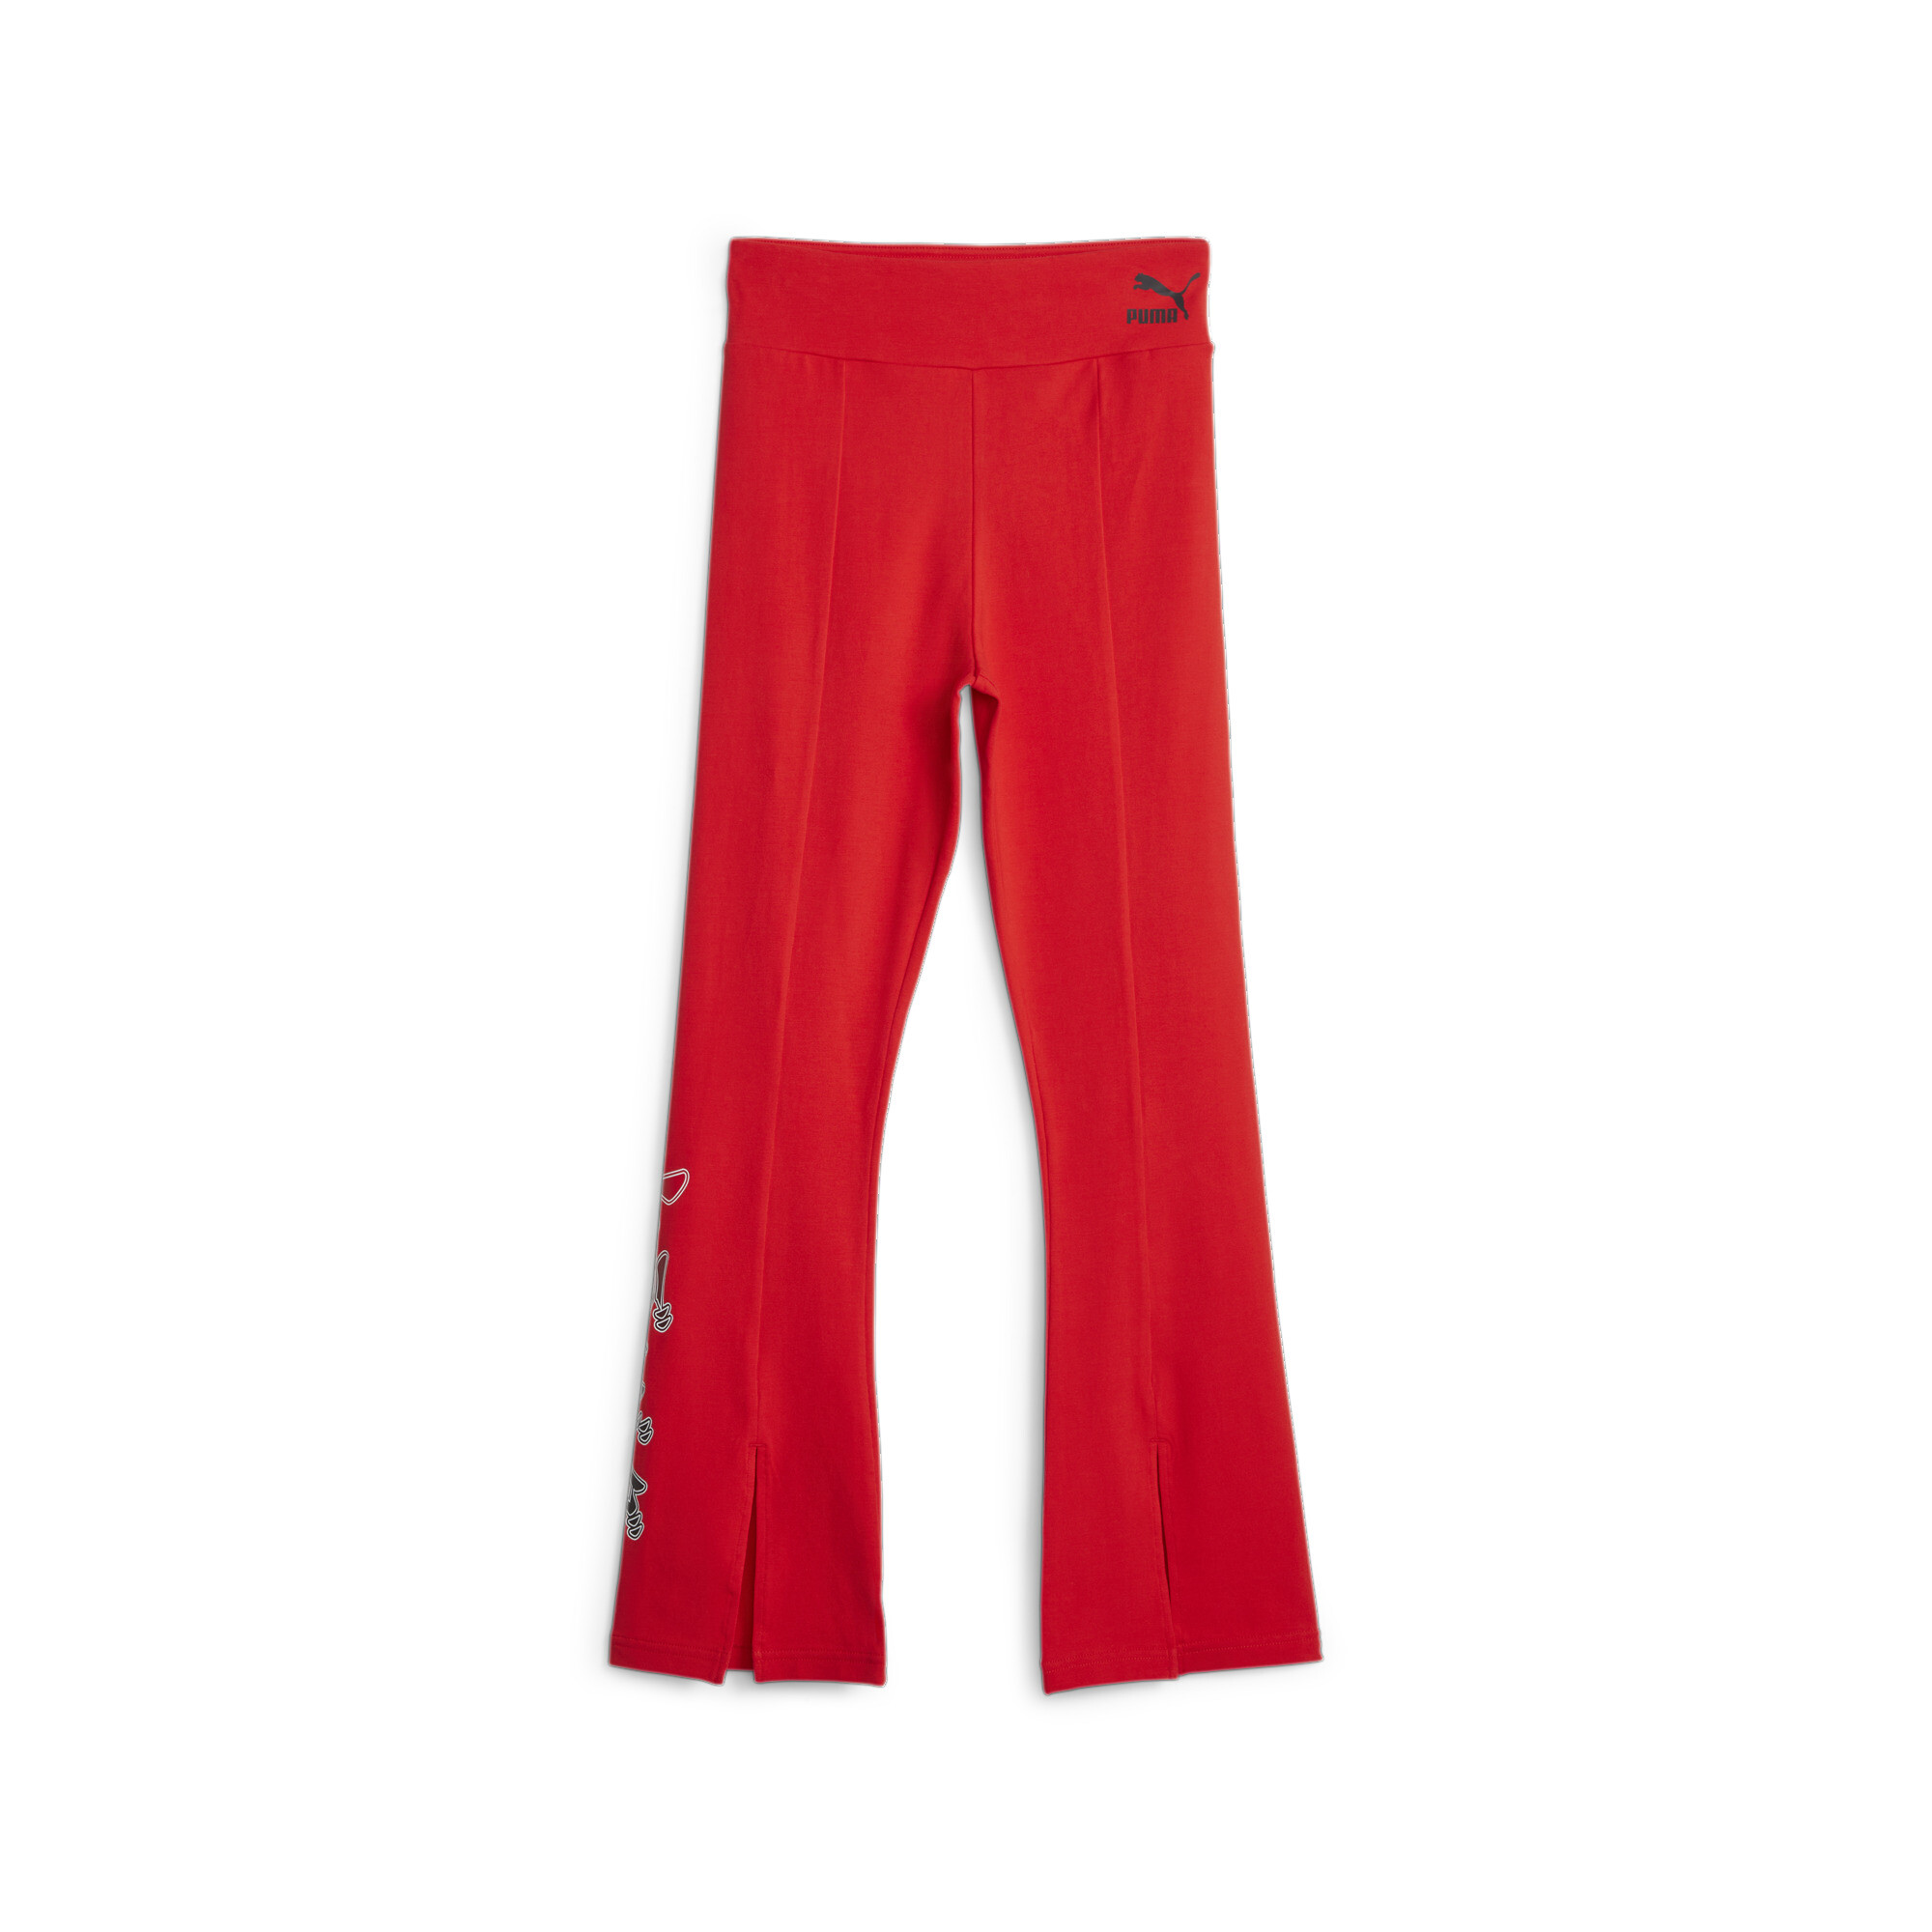 PUMA X MIRACULOUS Leggings In Red, Size 11-12 Youth